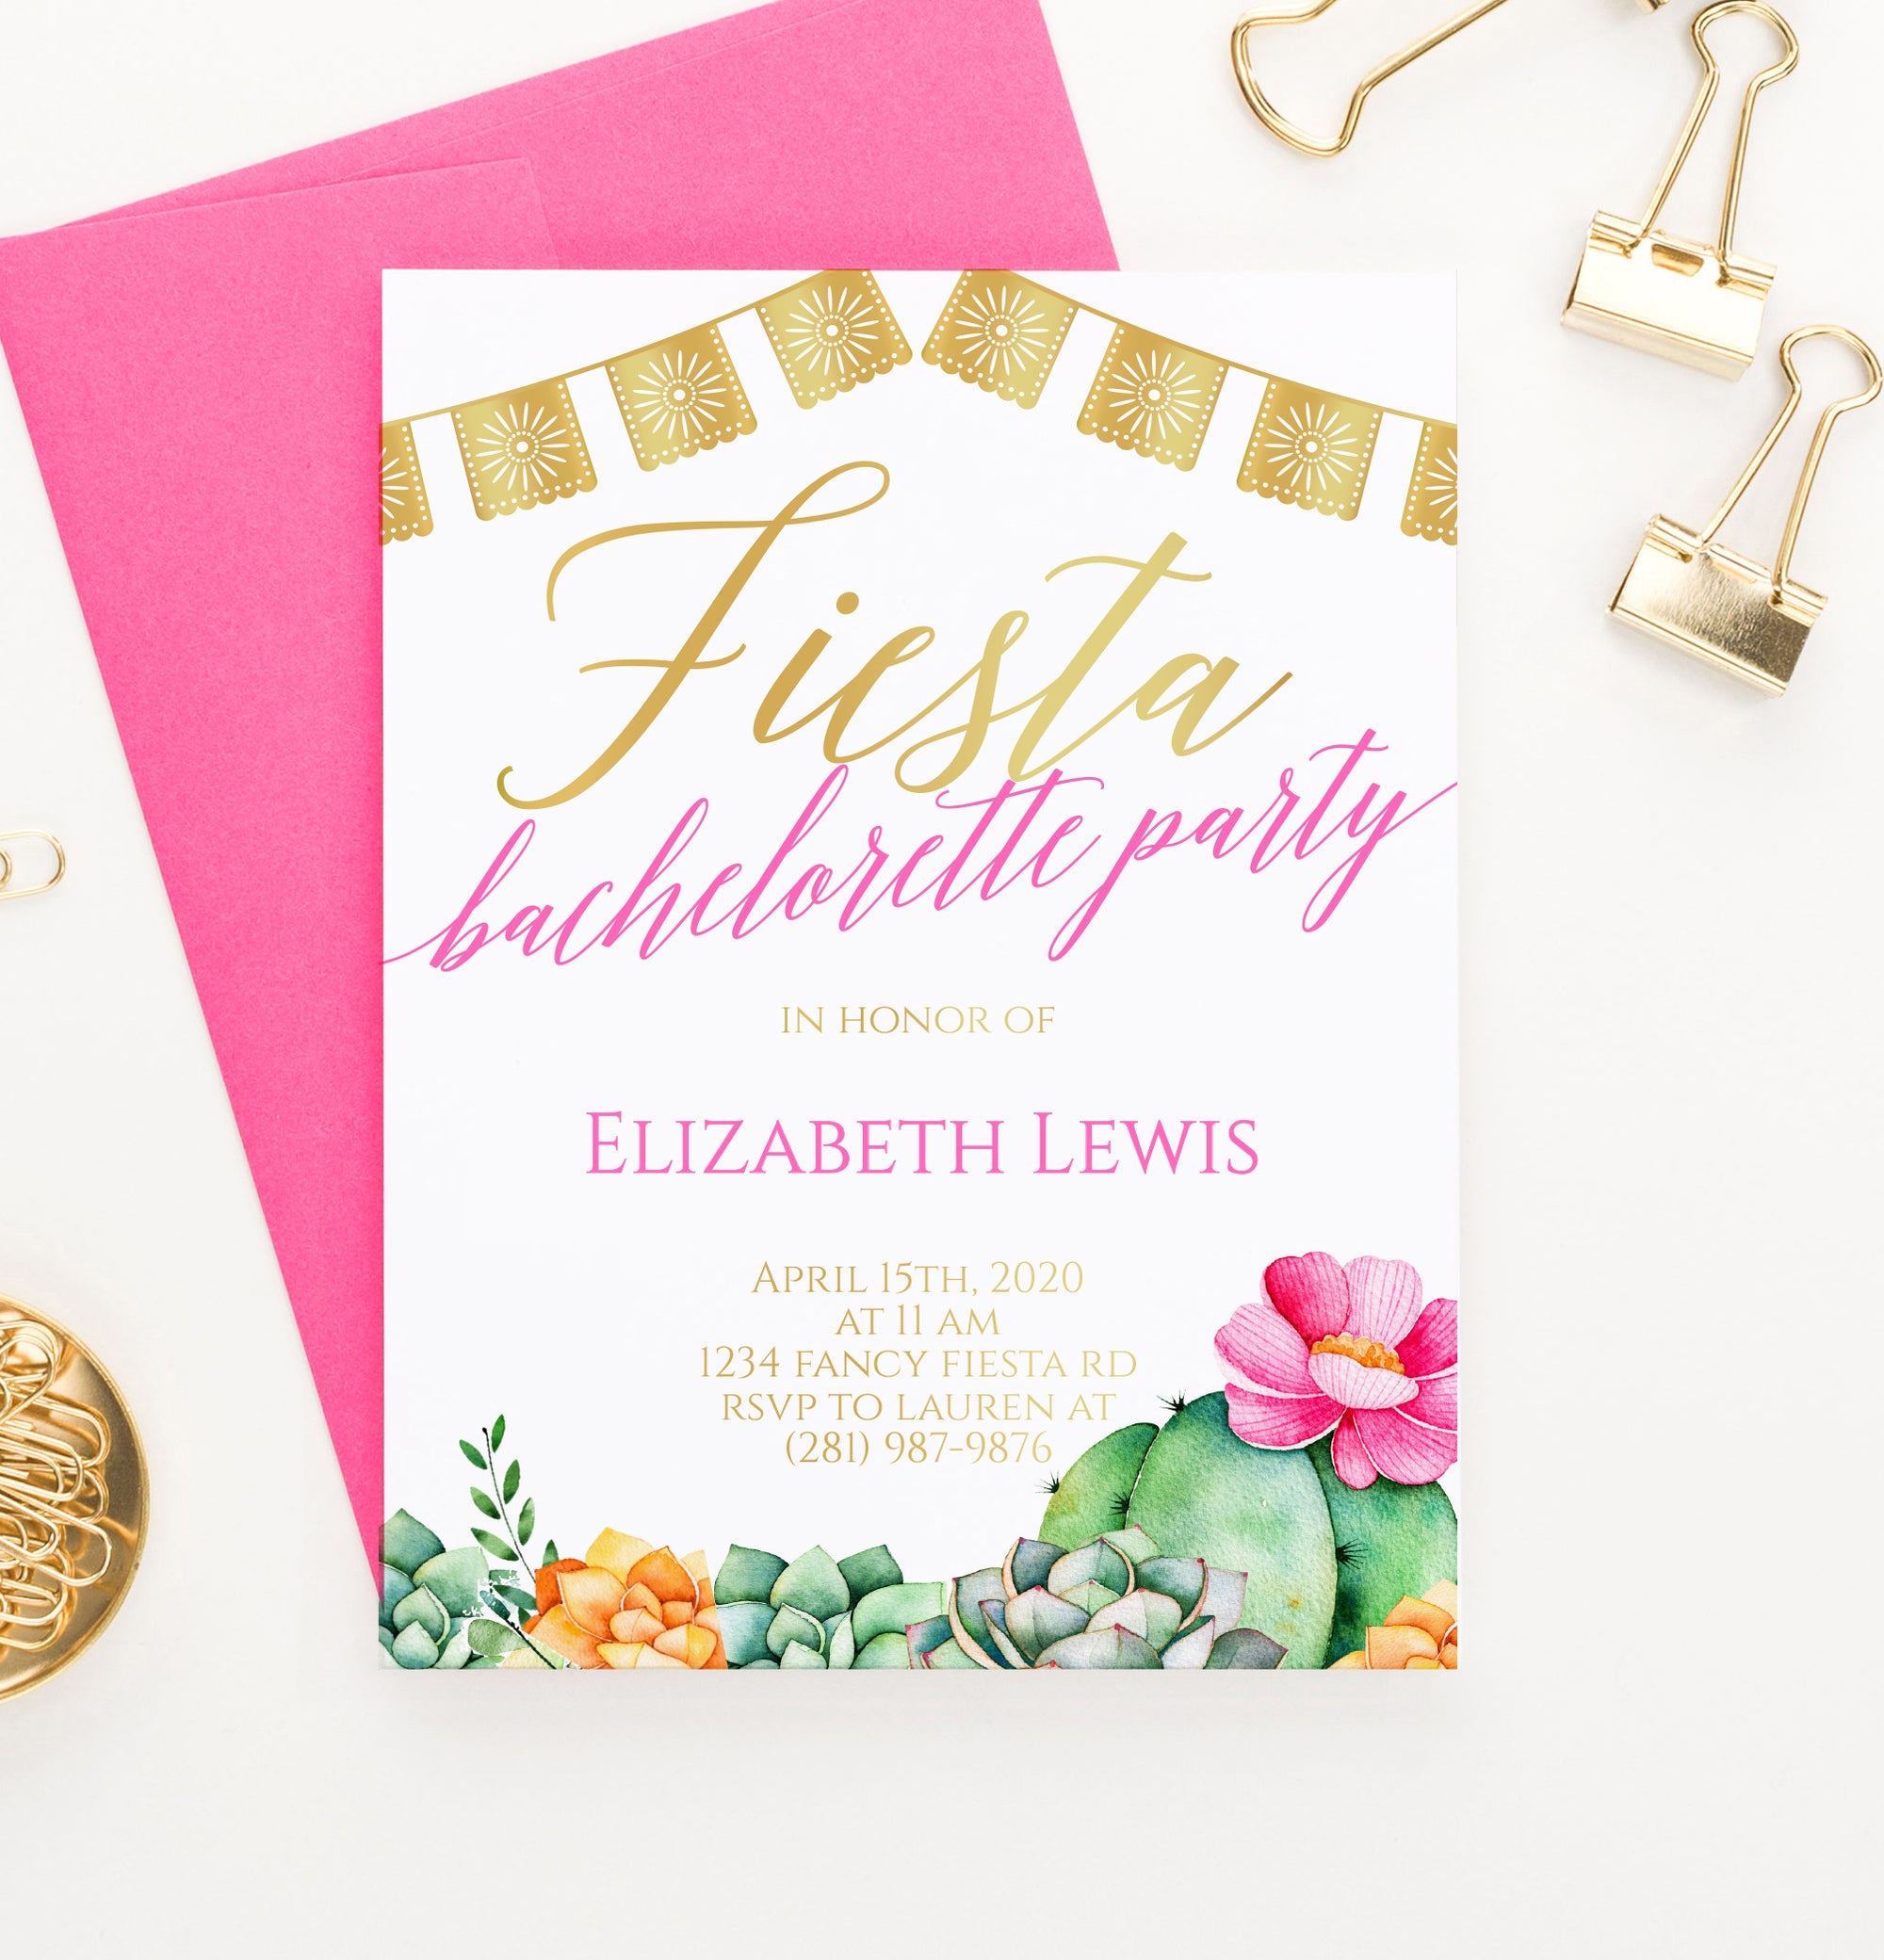 Personalized Fiesta Bachelorette Party Invitations With Succulents